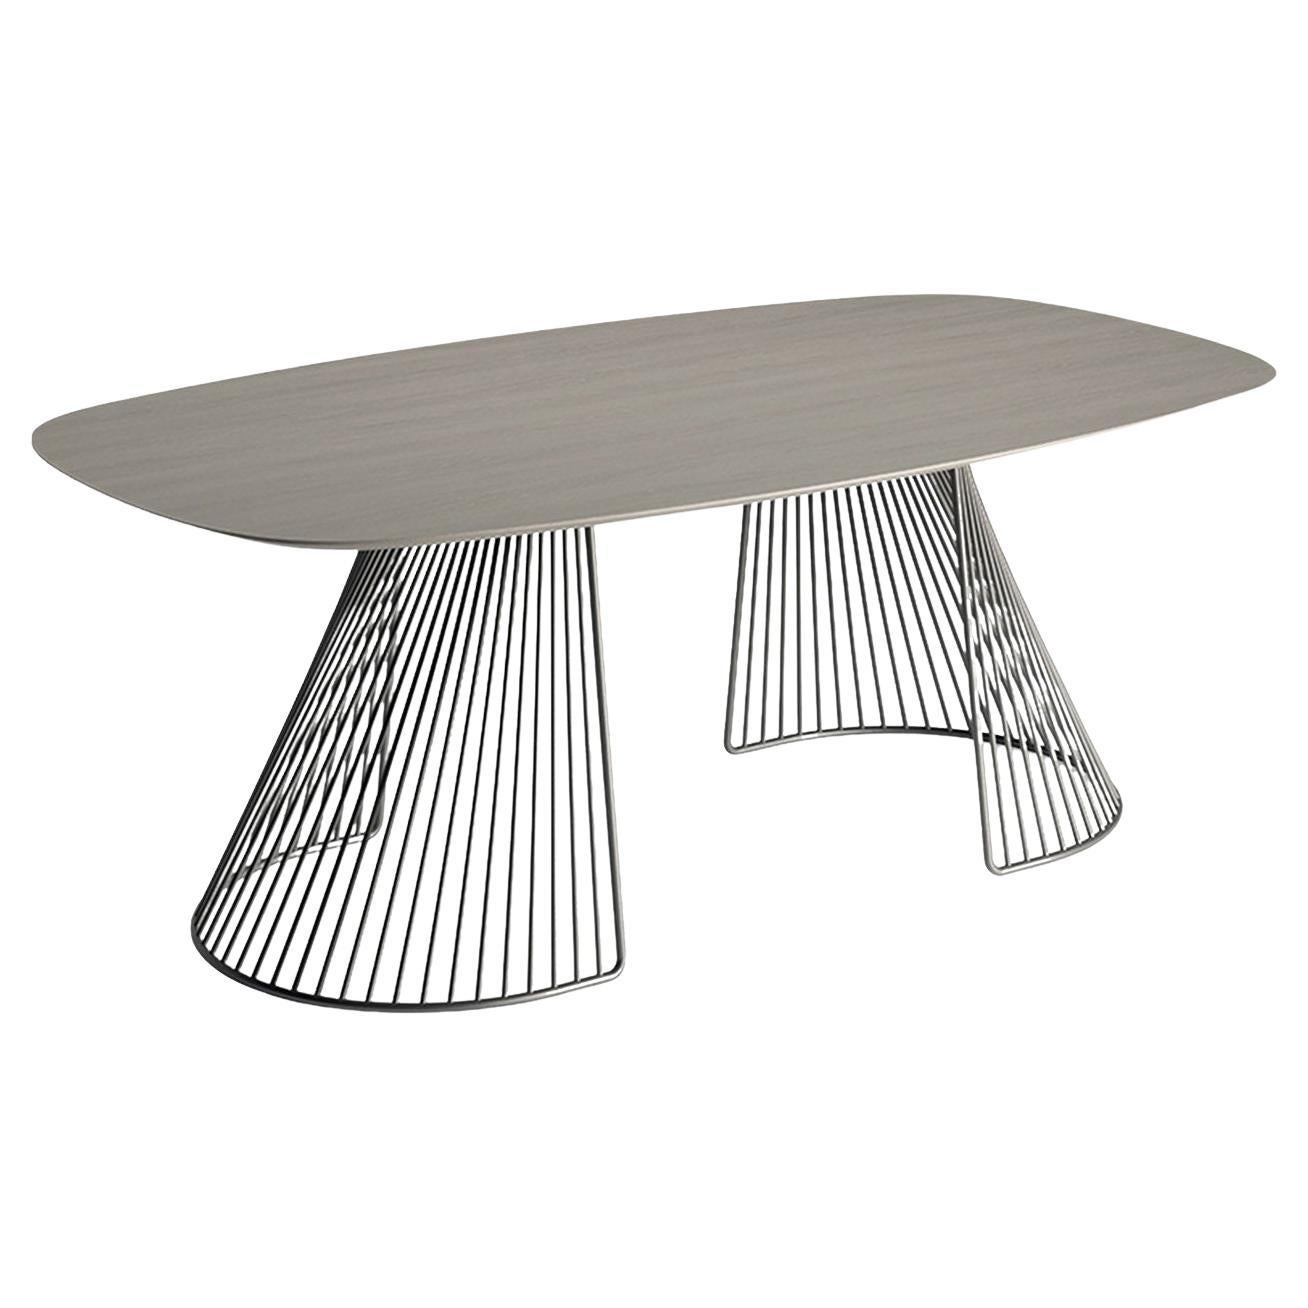 Grid Canadian Durmast Rectangular Table by Ciani Design For Sale